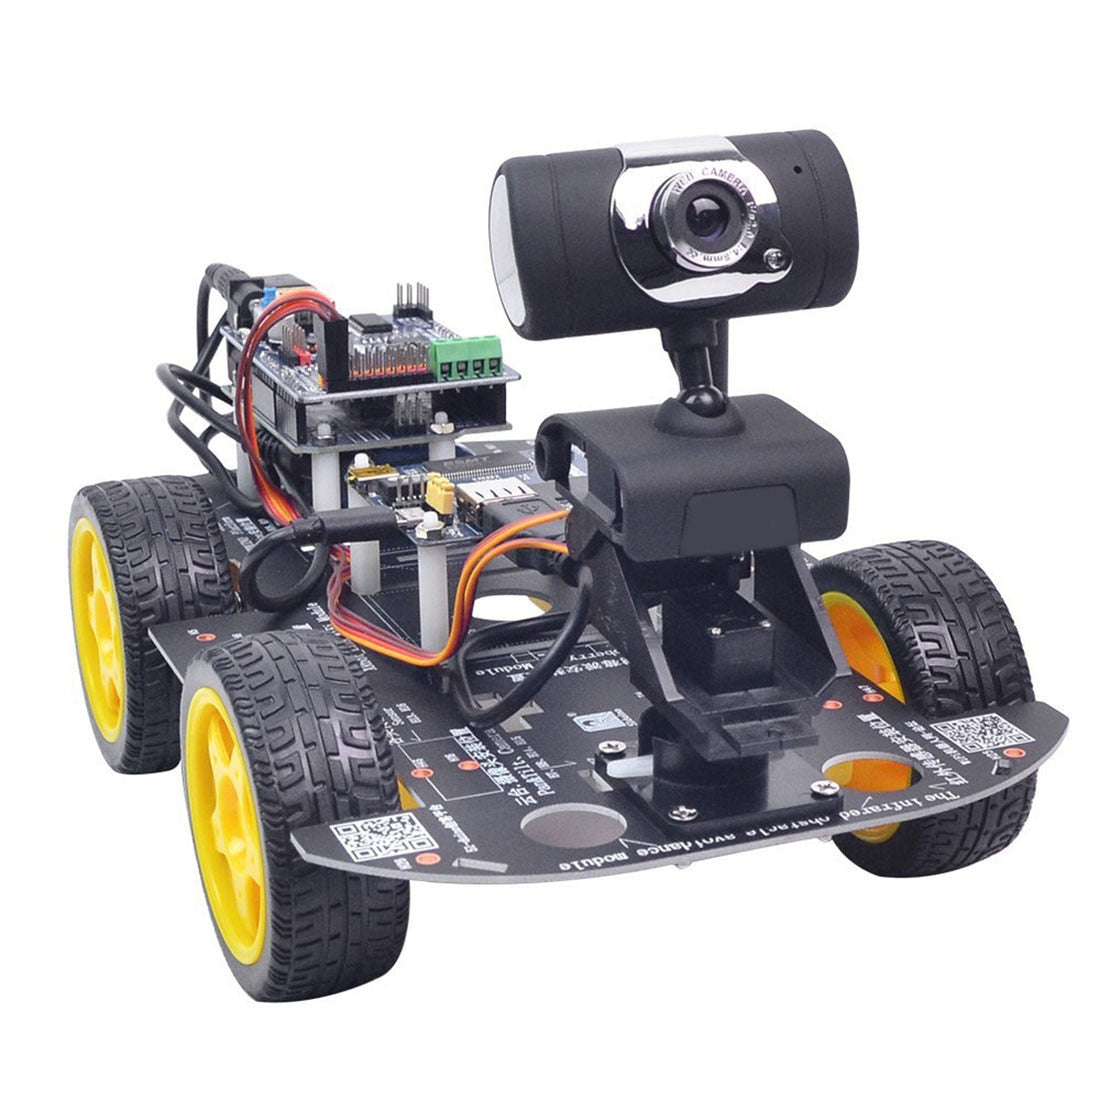 Programmable Robot Toy DIY Wifi Steam Car With Graphic Programming XR BLOCK Linux For Arduino UNO R3 (Standard Version)